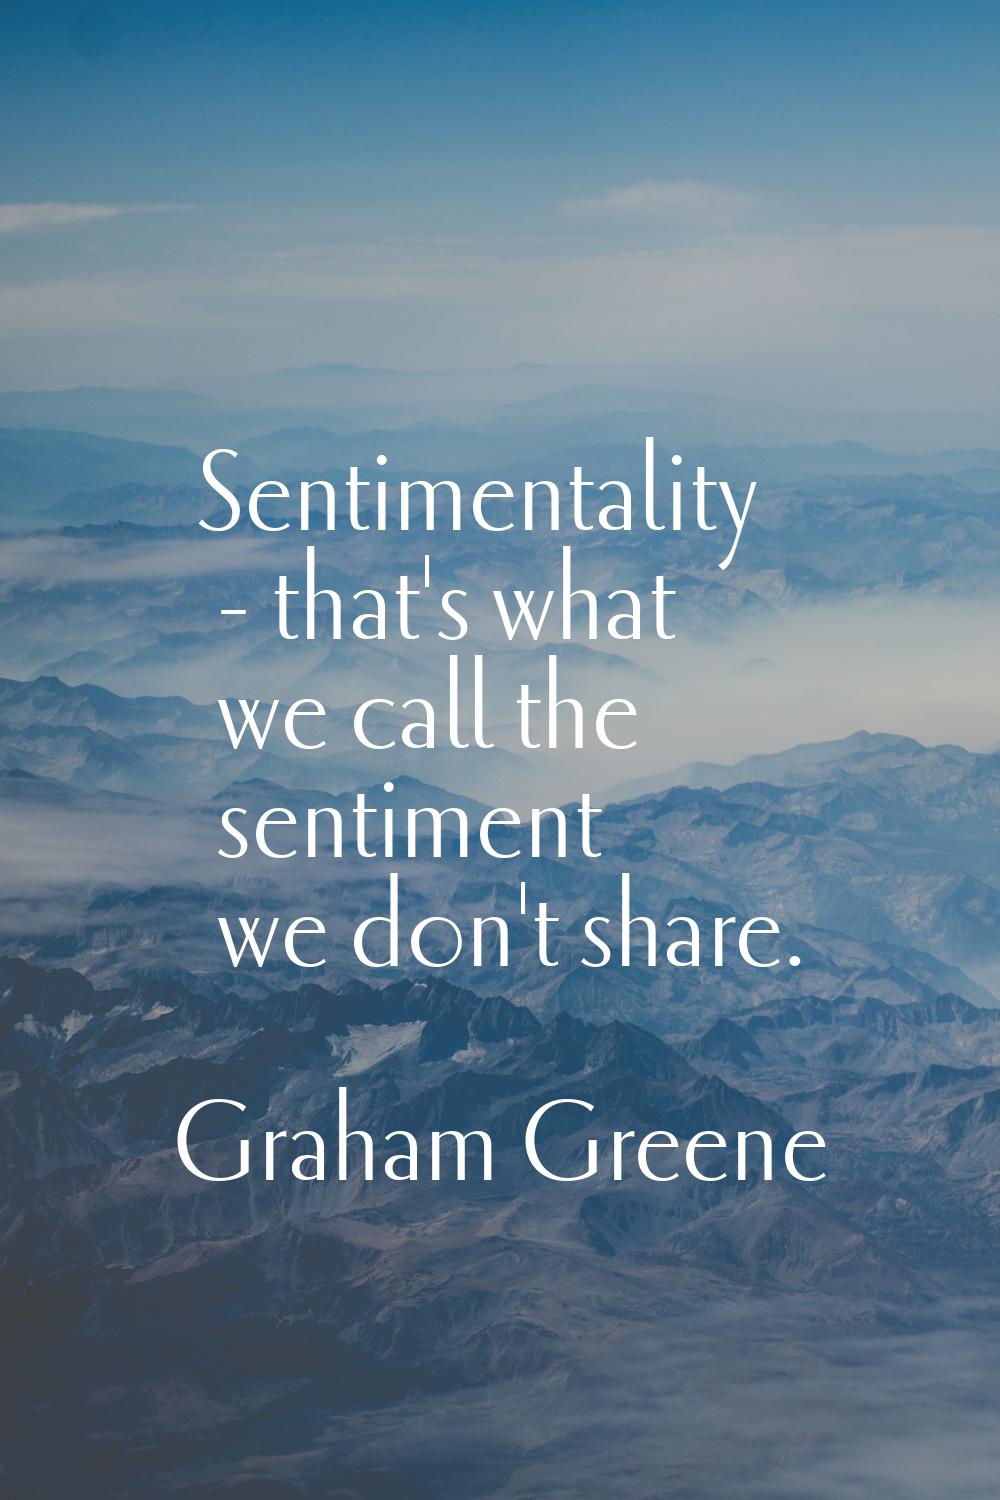 Sentimentality - that's what we call the sentiment we don't share.